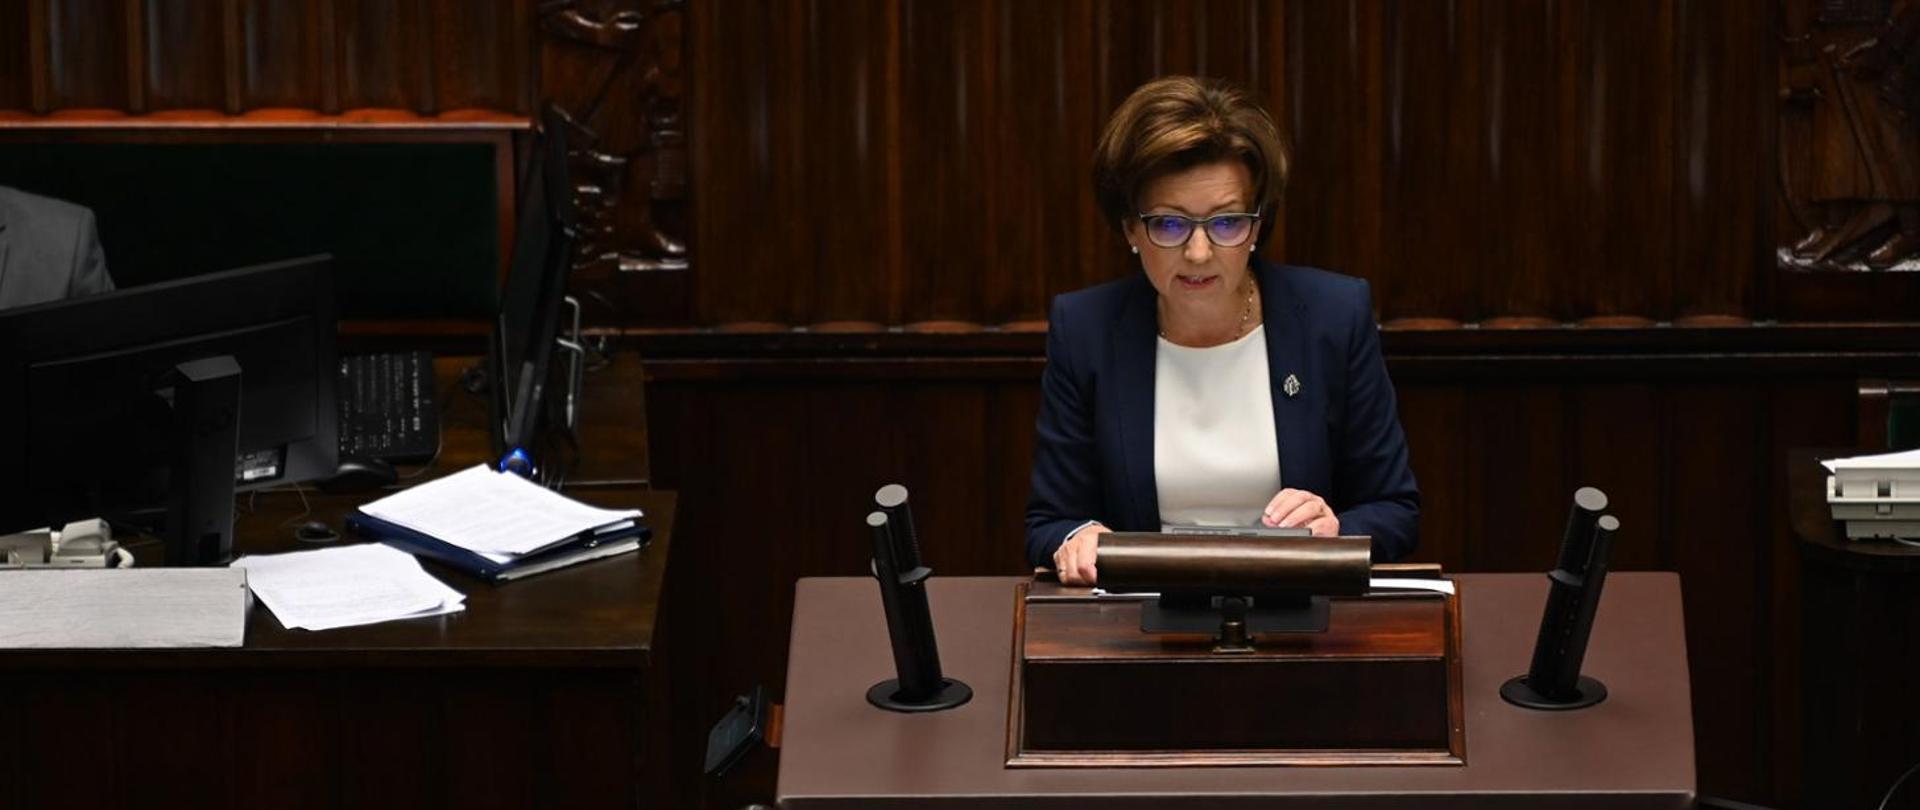 Minister of Family and Social Policy, Marlena Maląg, during her speech in the Sejm.